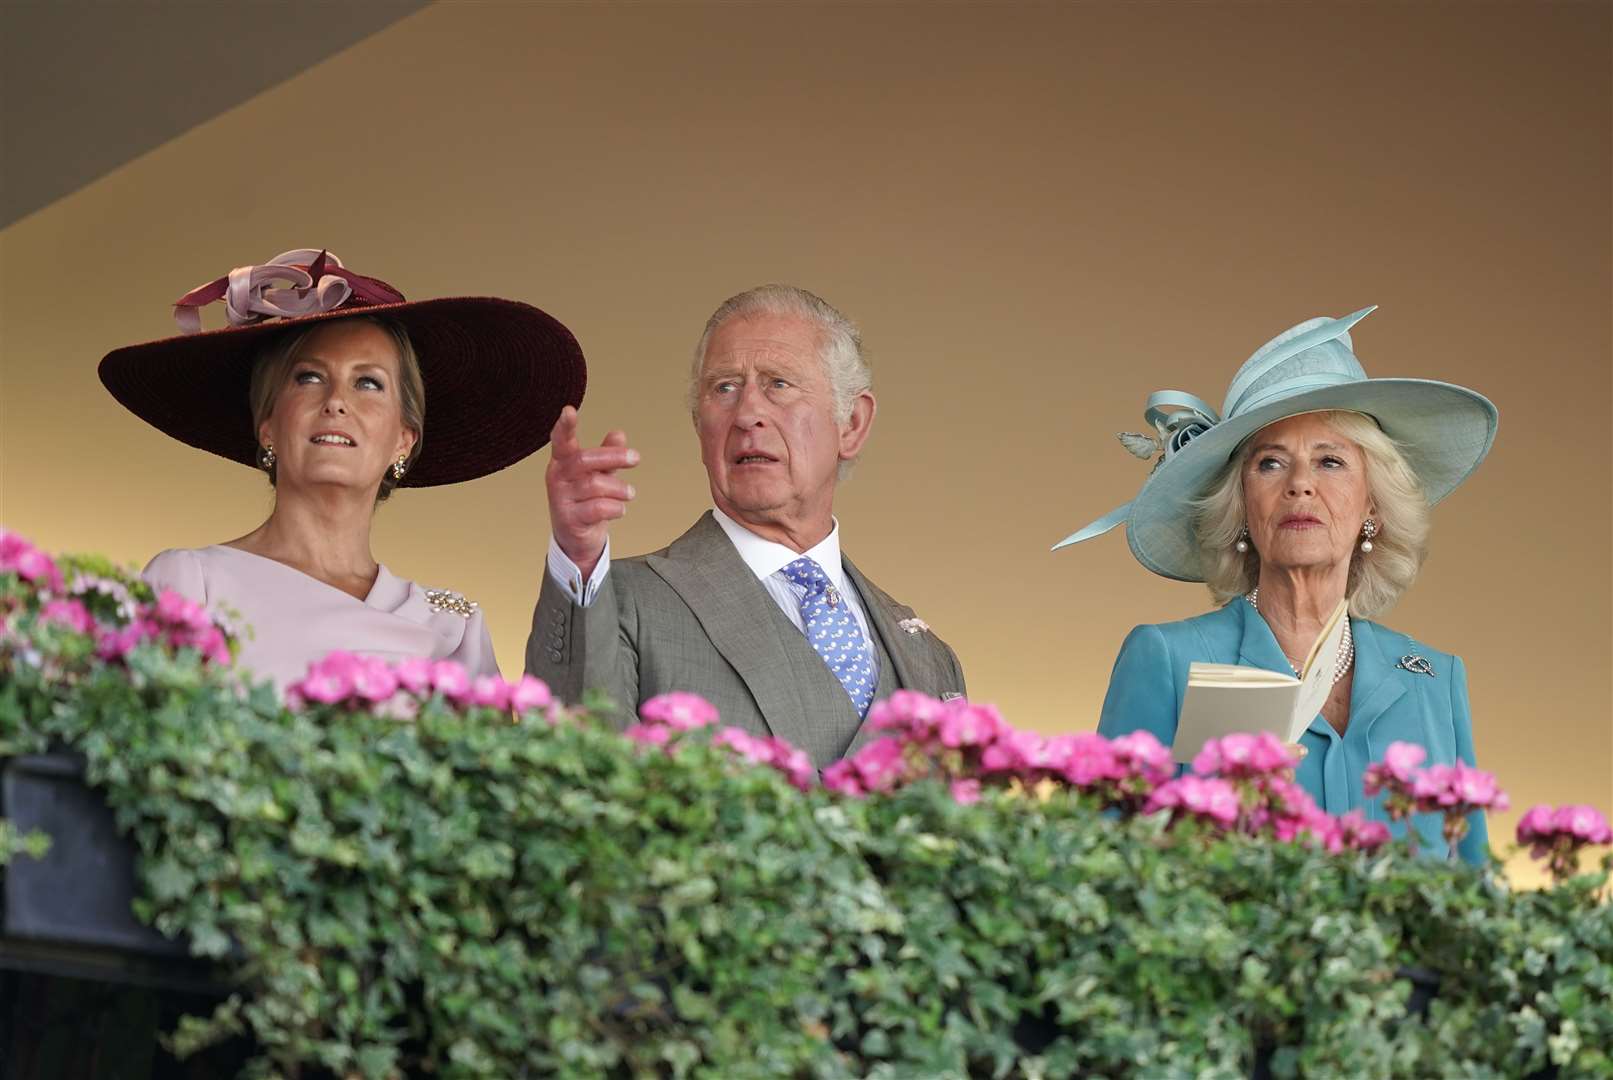 The Countess of Wessex, the Prince of Wales and the Duchess of Cornwall at Royal Ascot (Aaron Chown/PA)